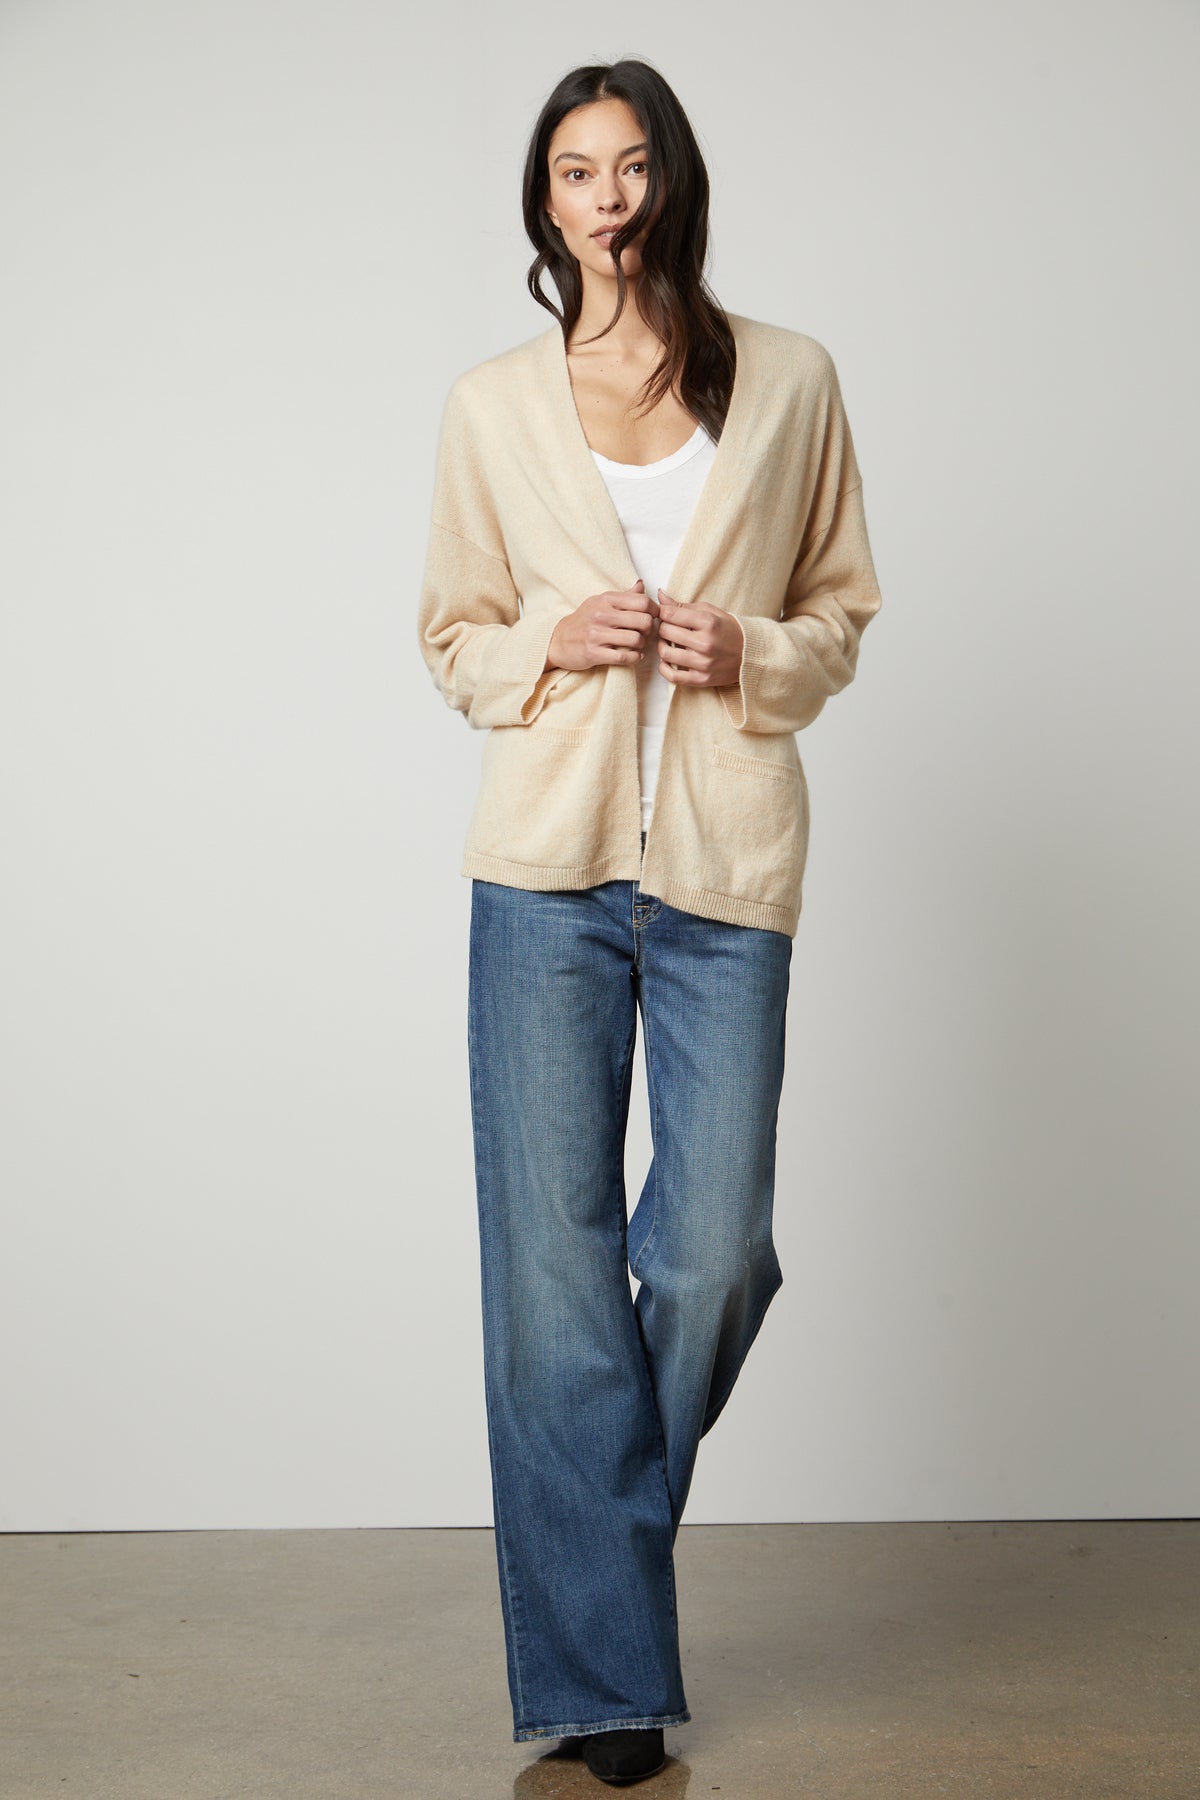 The model is wearing a LILA CASHMERE CARDIGAN by Velvet by Graham & Spencer and wide leg jeans.-26910345822401